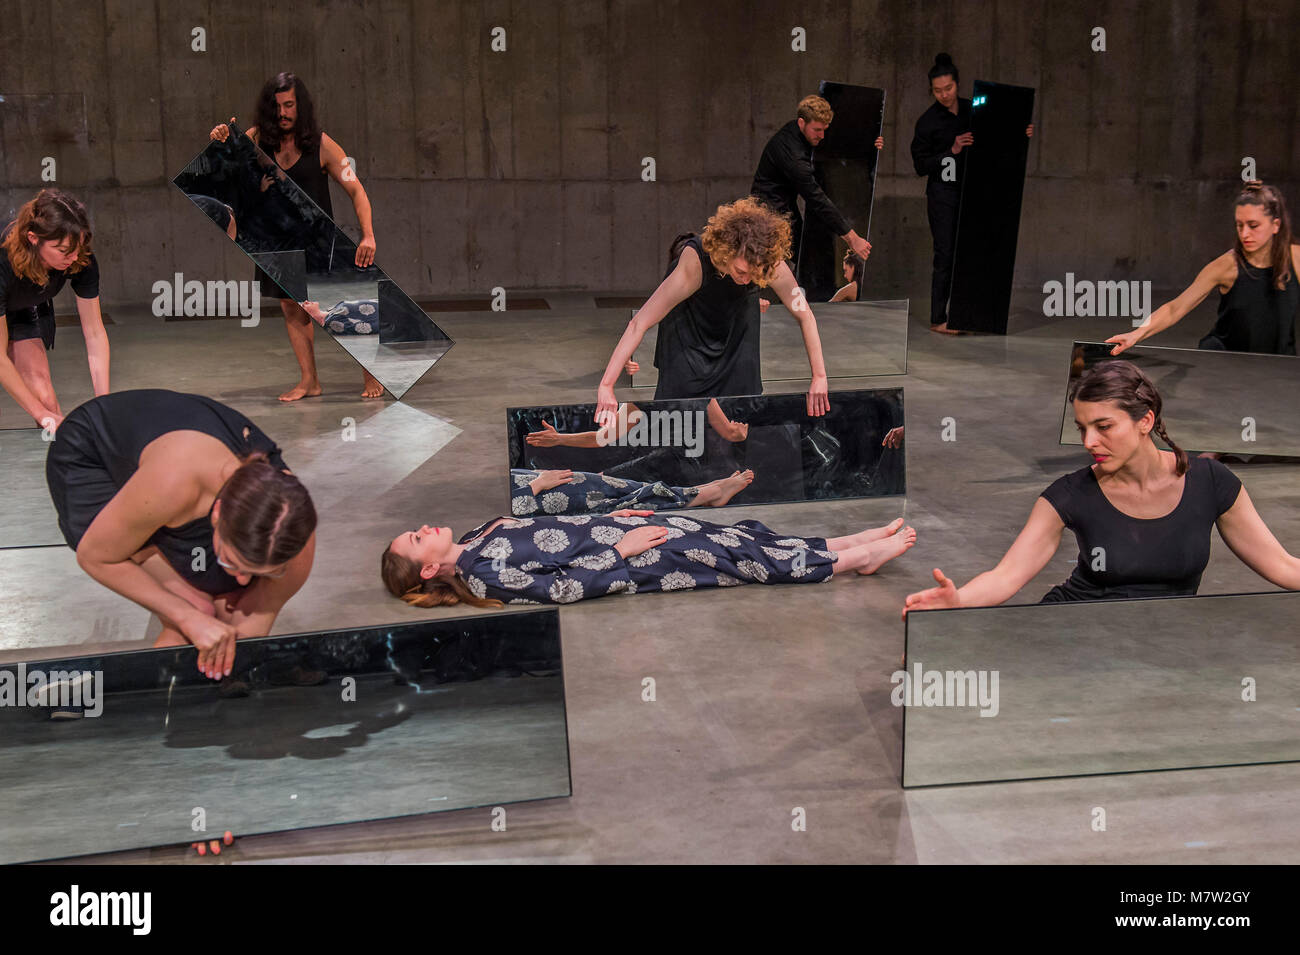 London, UK. 13th March, 2018. Mirror Piece II, an early work in which a group of performers make choreographed movements while holding tall; narrow mirrors - Joan Jonas, Tate Modern opens largest survey of pioneering performance artist’s work from her five decade career. It includes an immersive gallery exhibition and live performance programme. Credit: Guy Bell/Alamy Live News Stock Photo